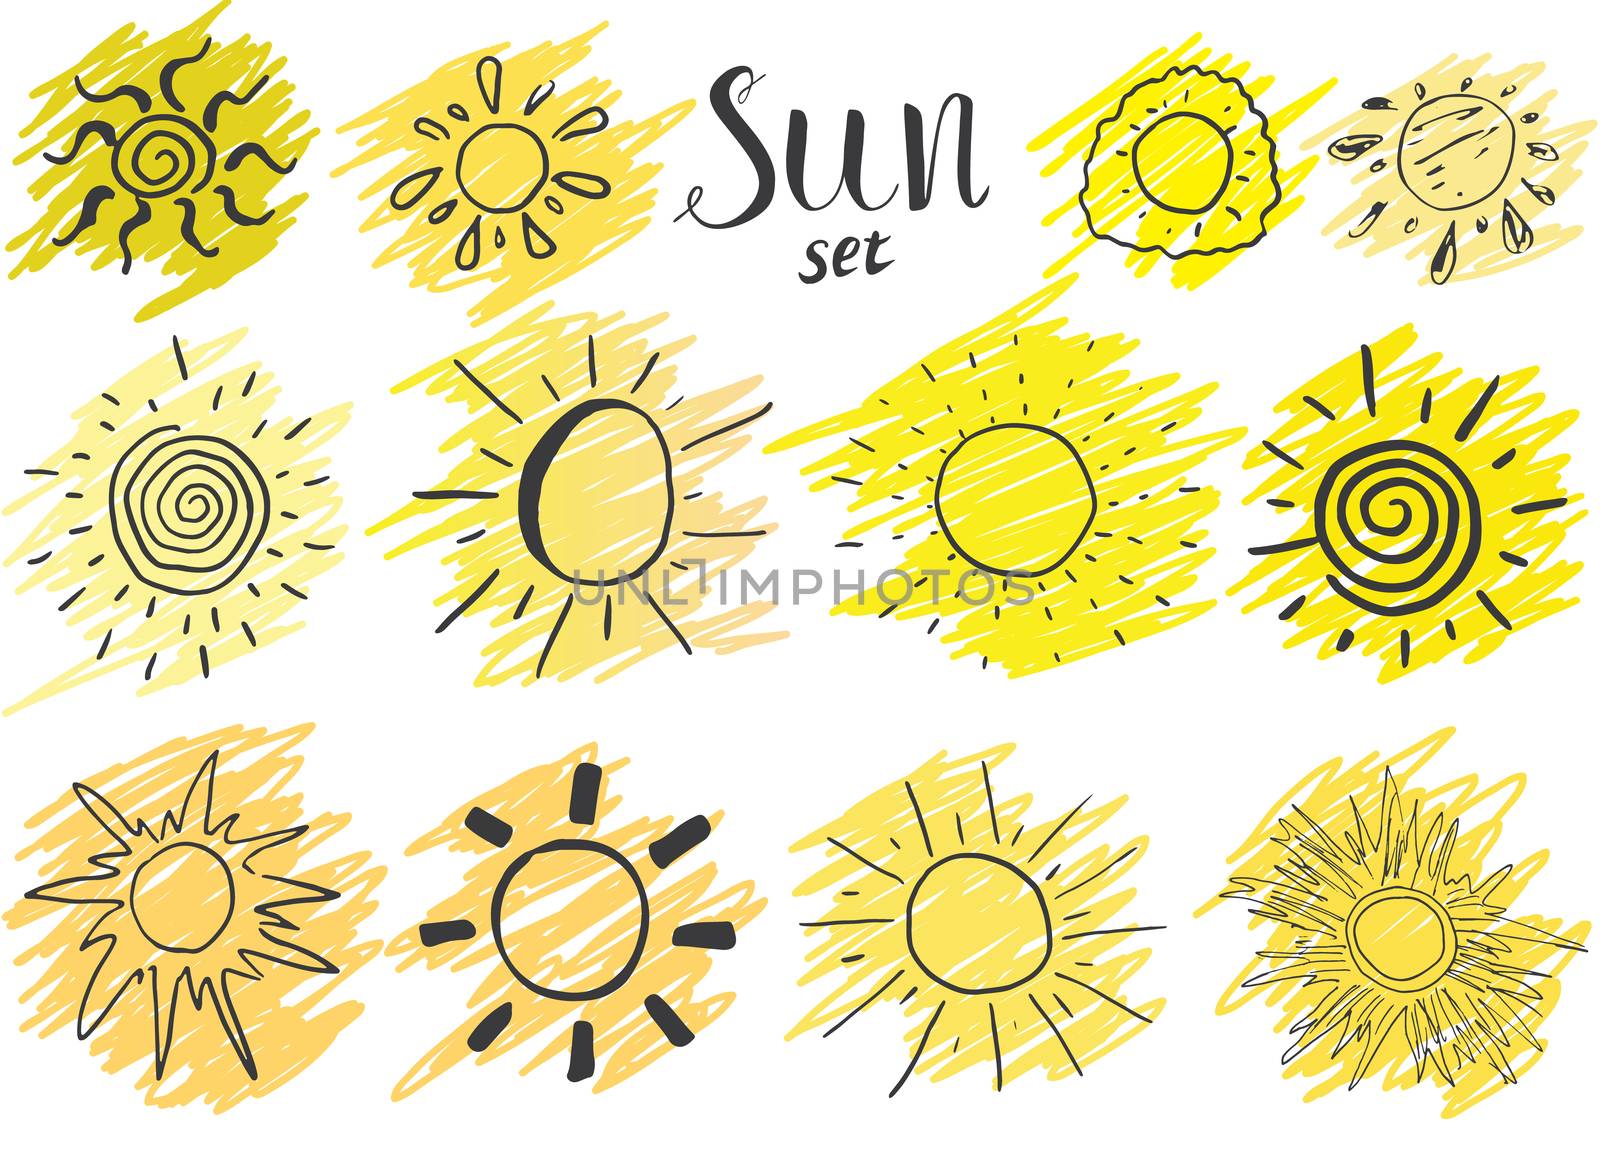 Hand drawn set of different suns, sketch vector illustration isolated on white.